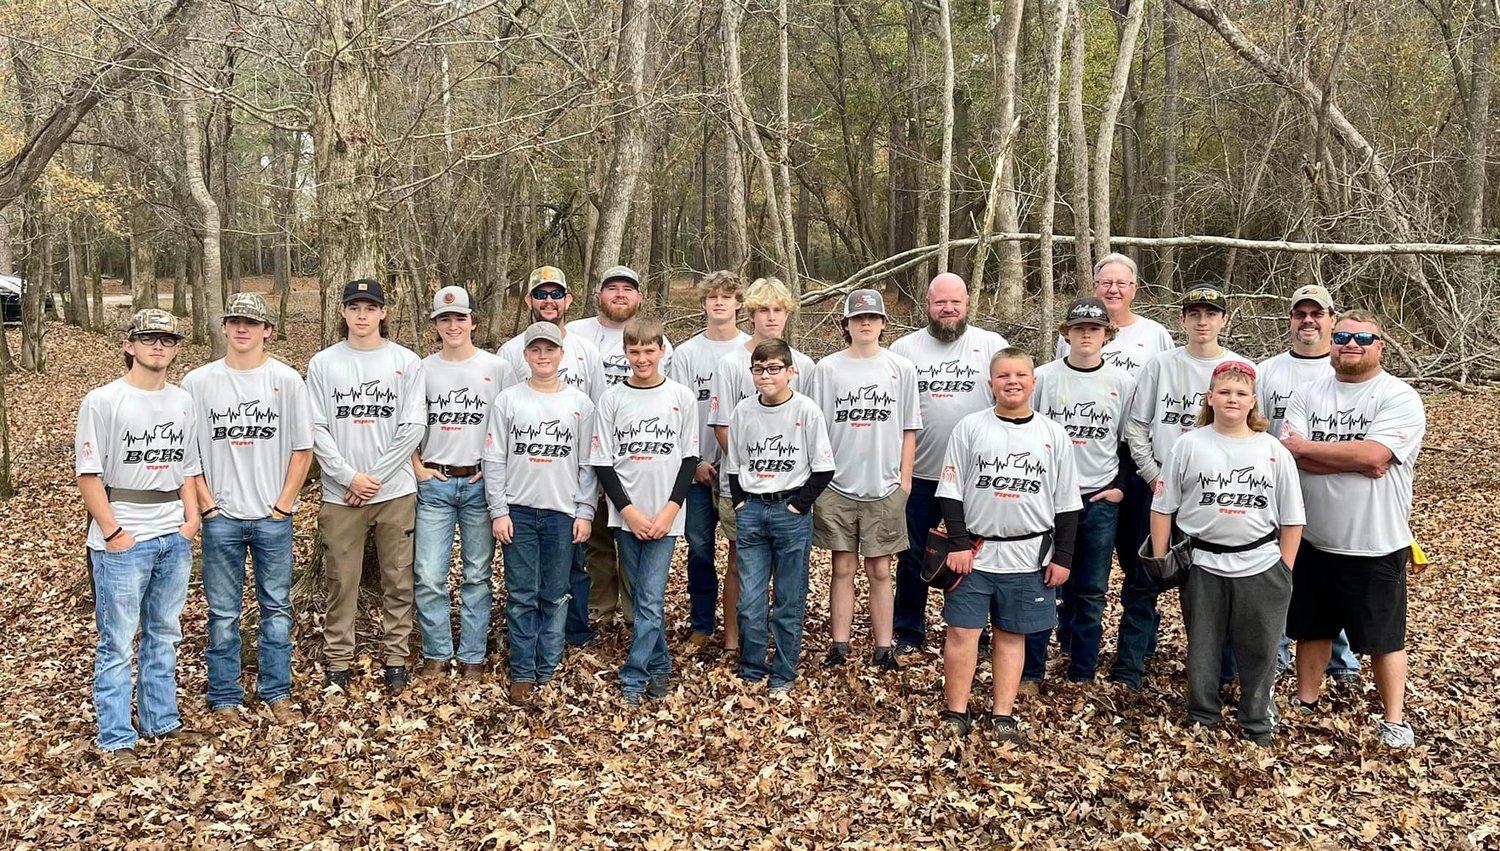 The Baldwin County High School Sporting Clays team took on the 2022 River Region Fall Sporting Clay Shoot at Lower Wetumpka Shotgun Sports Club Saturday, Dec. 3, and had three competitors earn top-three finishes.